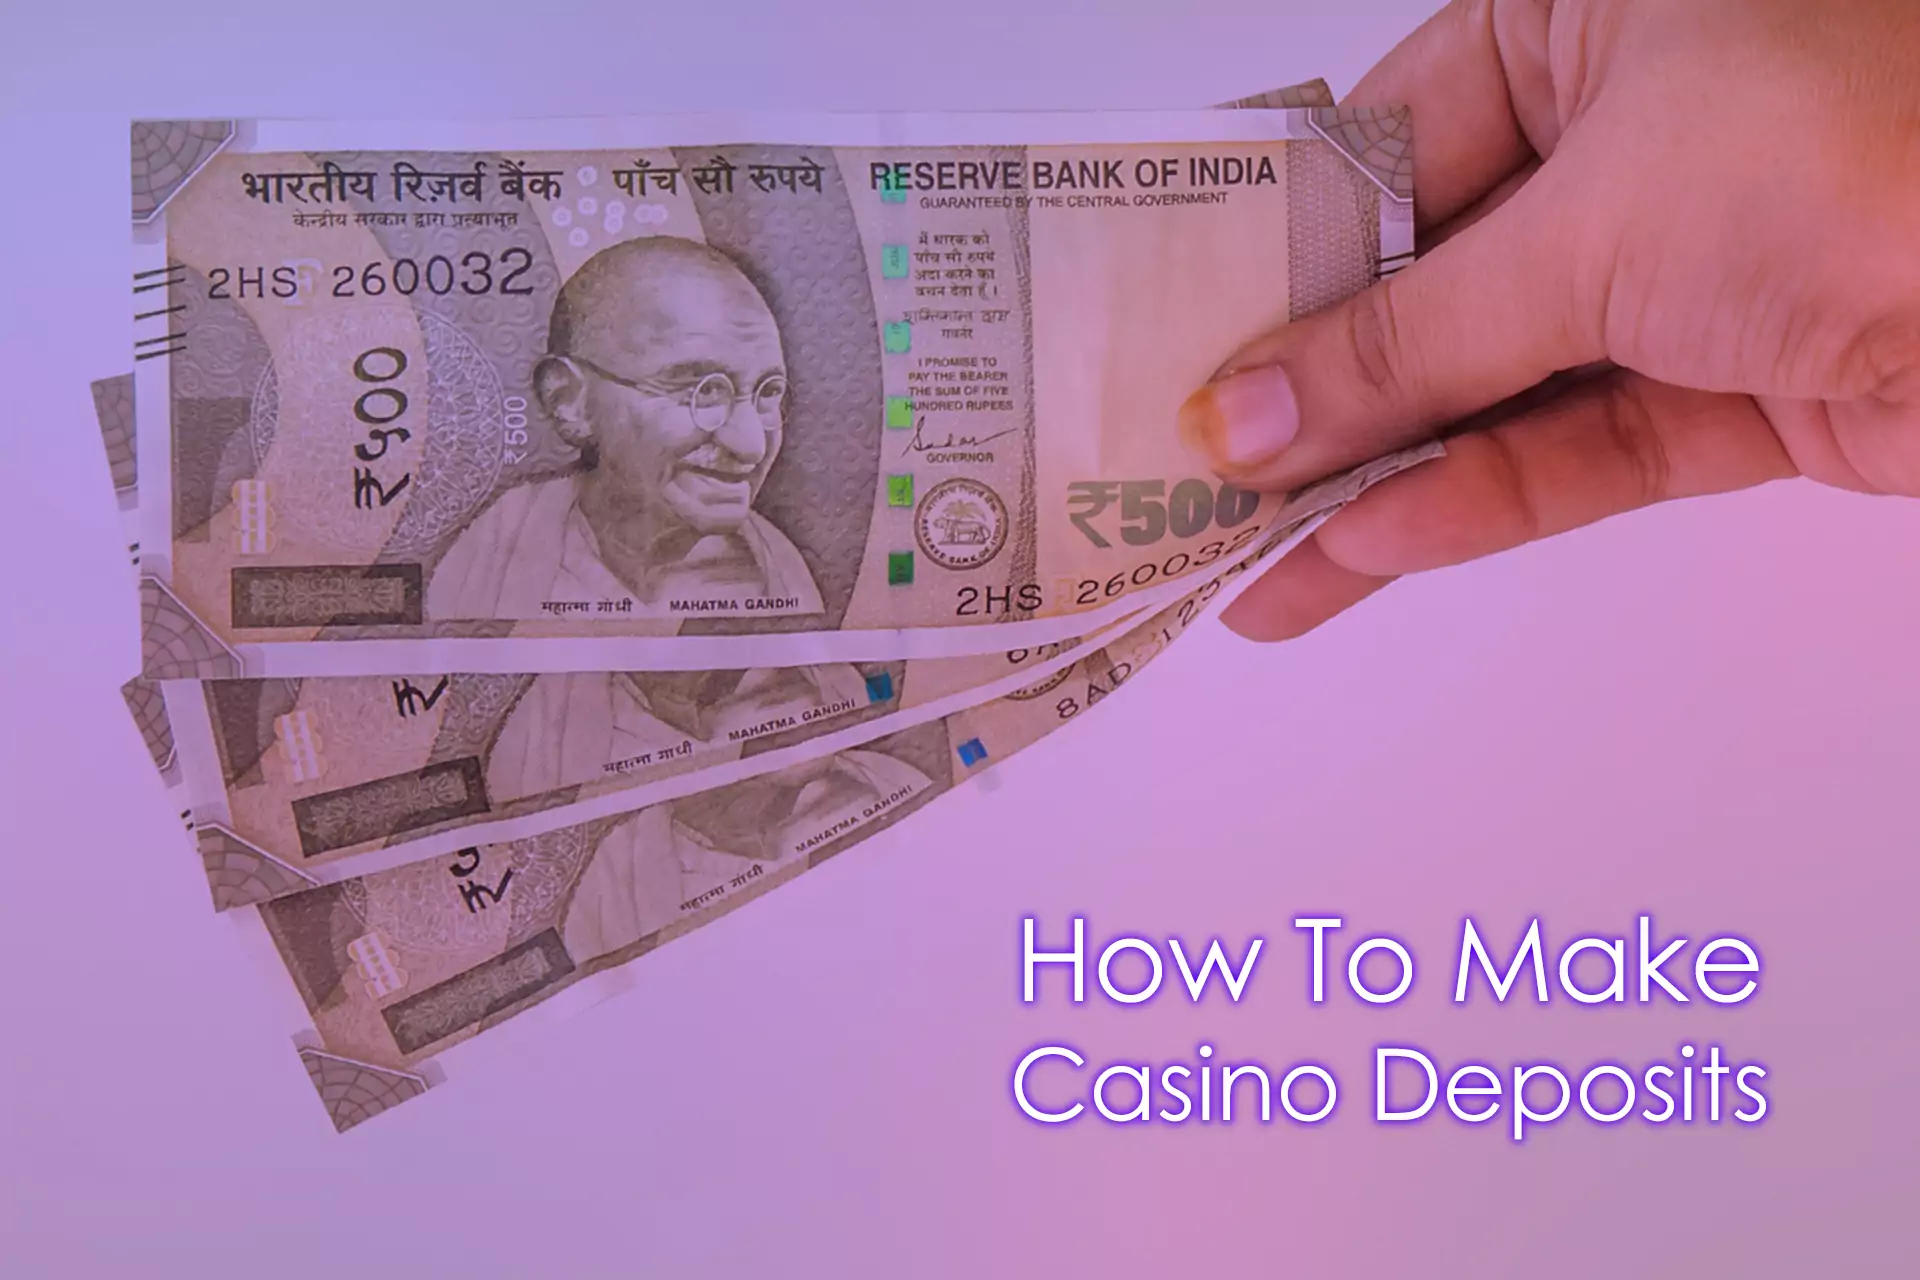 Follow our tips to make deposits to casino accounts in Indian rupees.